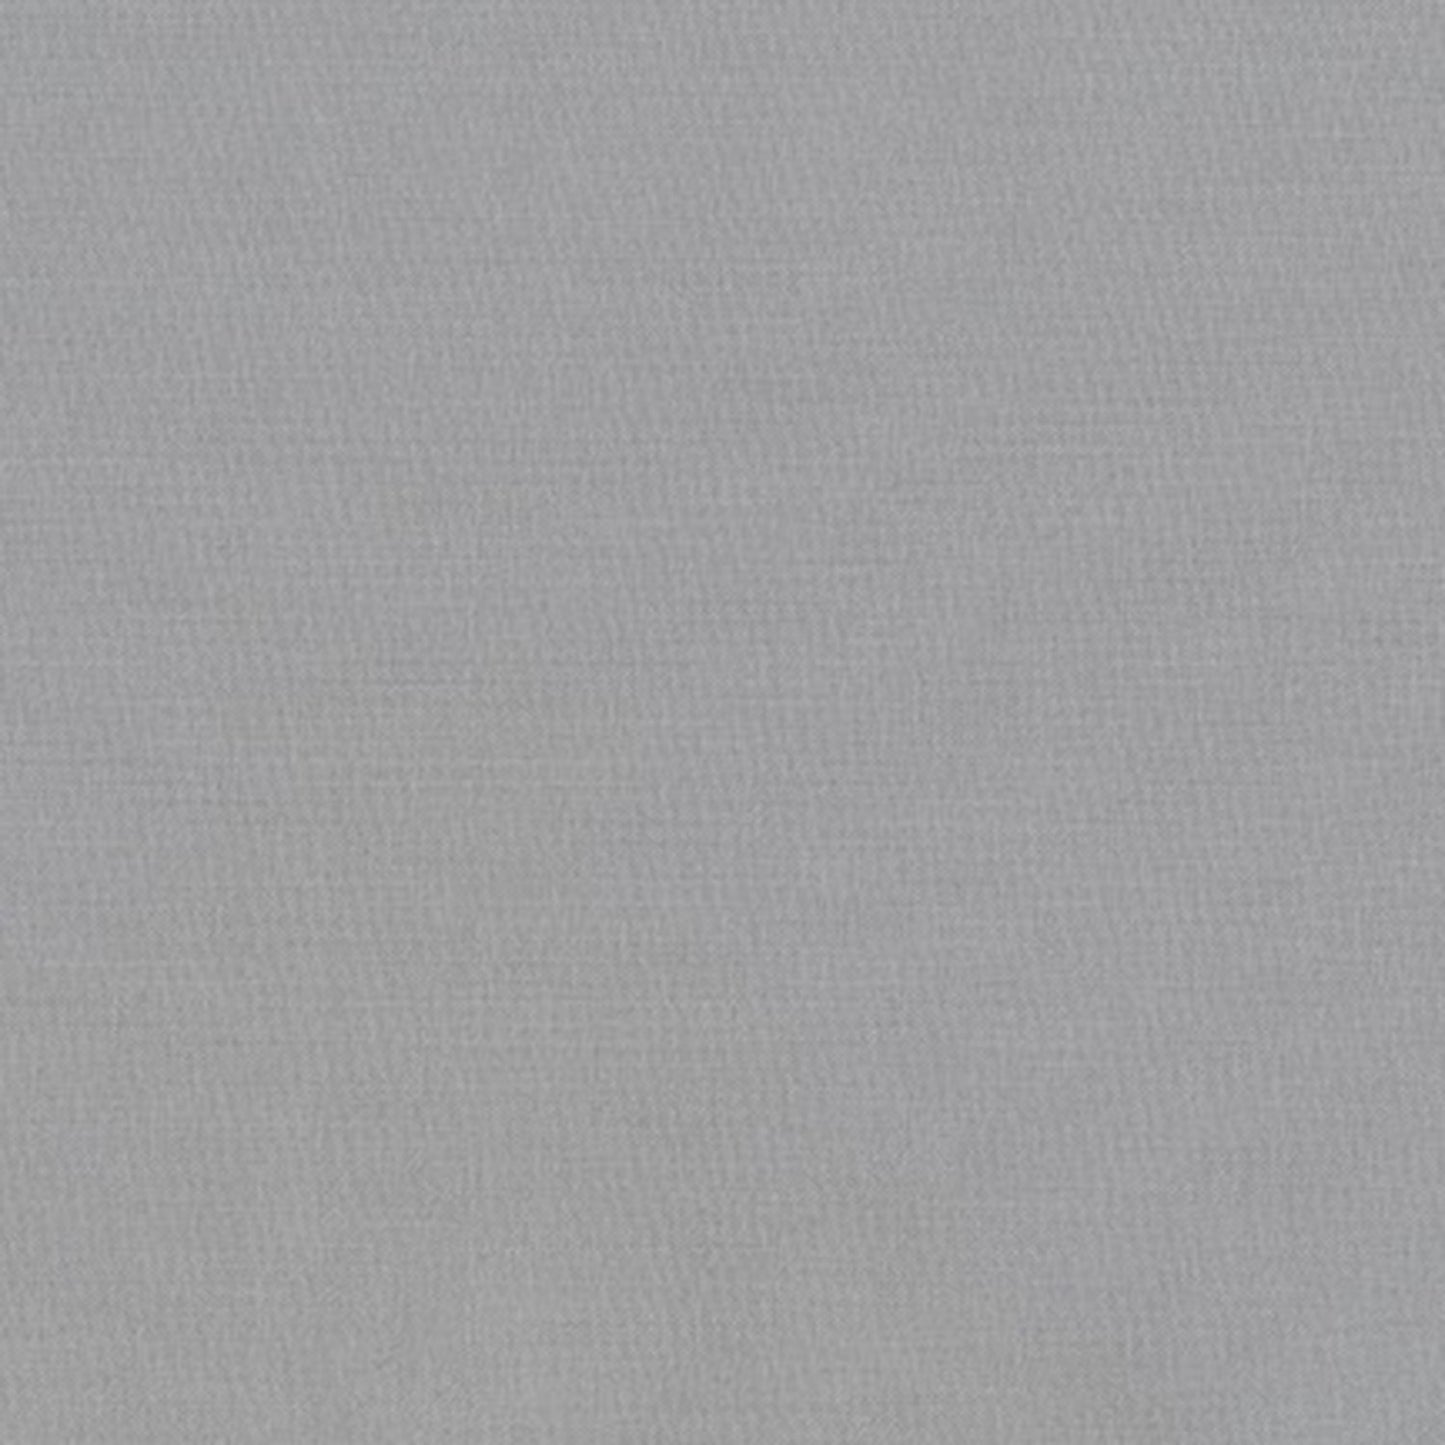 Kona Solids || Overcast || Cotton Quilting Fabric